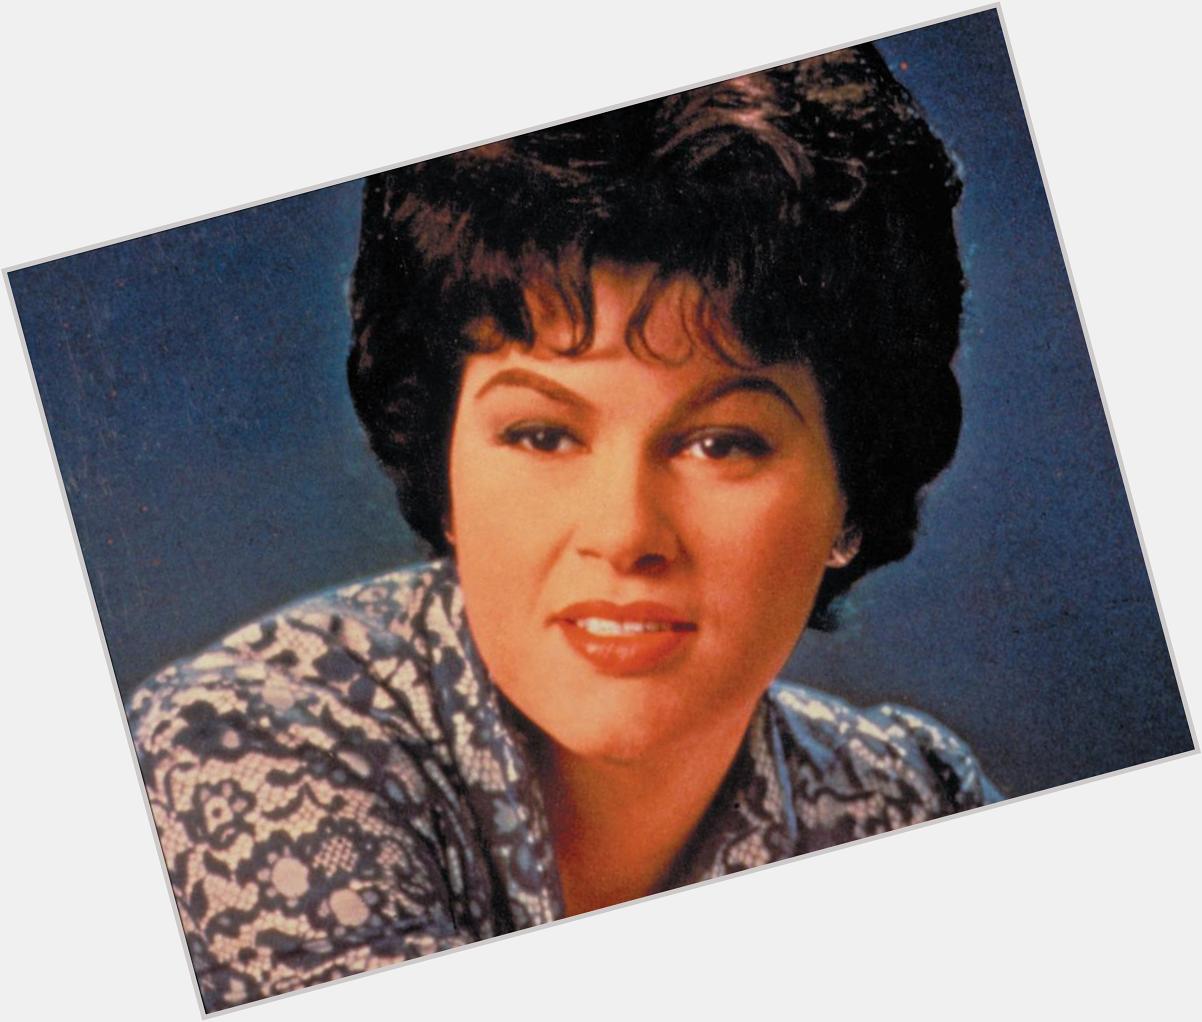 Happy Birthday to the late Patsy Cline. Despite a short 30 year life, grateful God blessed us with her lovely voice! 